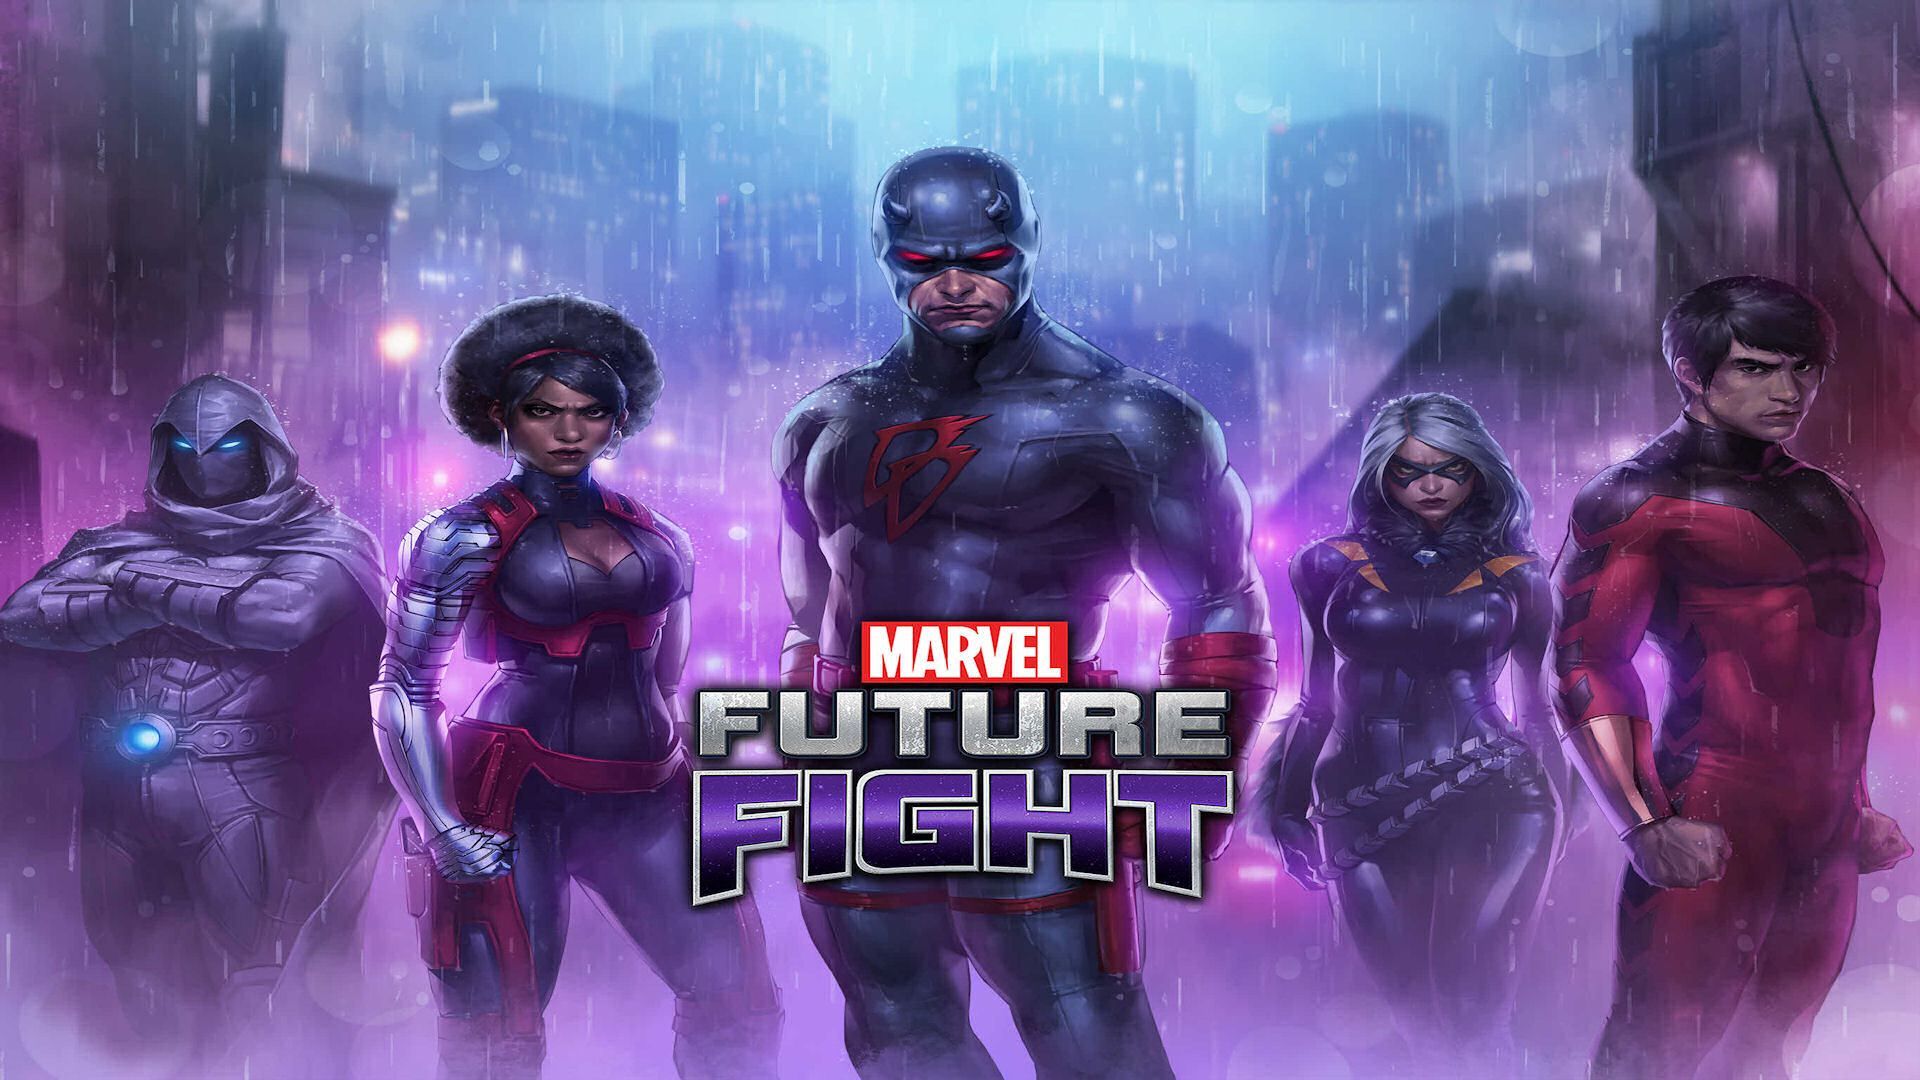 Marvel Wallpaper Art From Gallery - Marvel Future Fight All , HD Wallpaper & Backgrounds